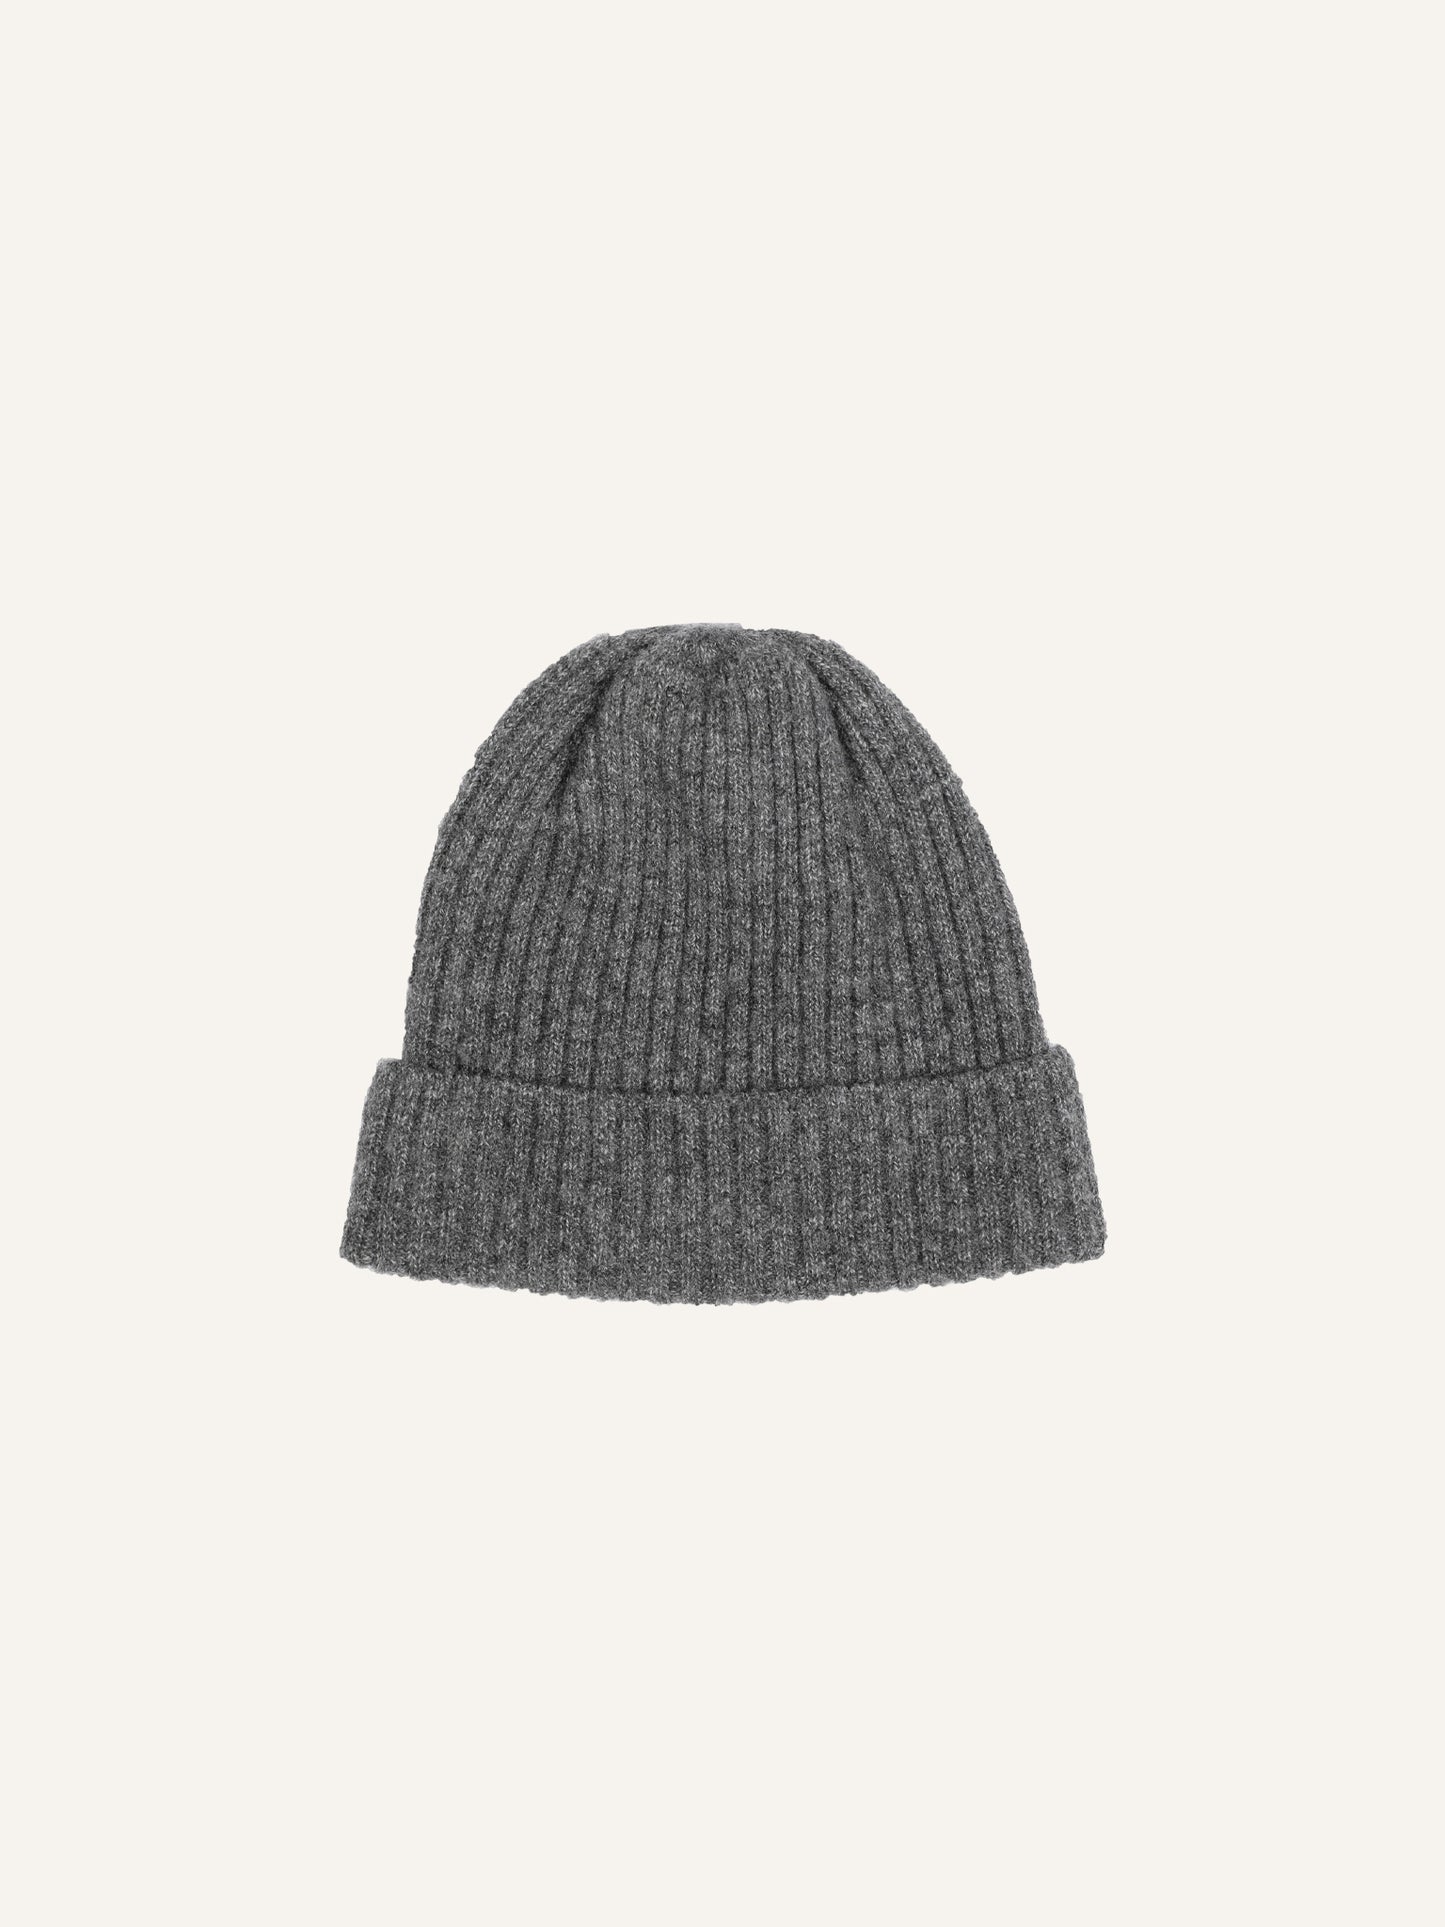 BRUSHED KNITTED BEANIE GREY